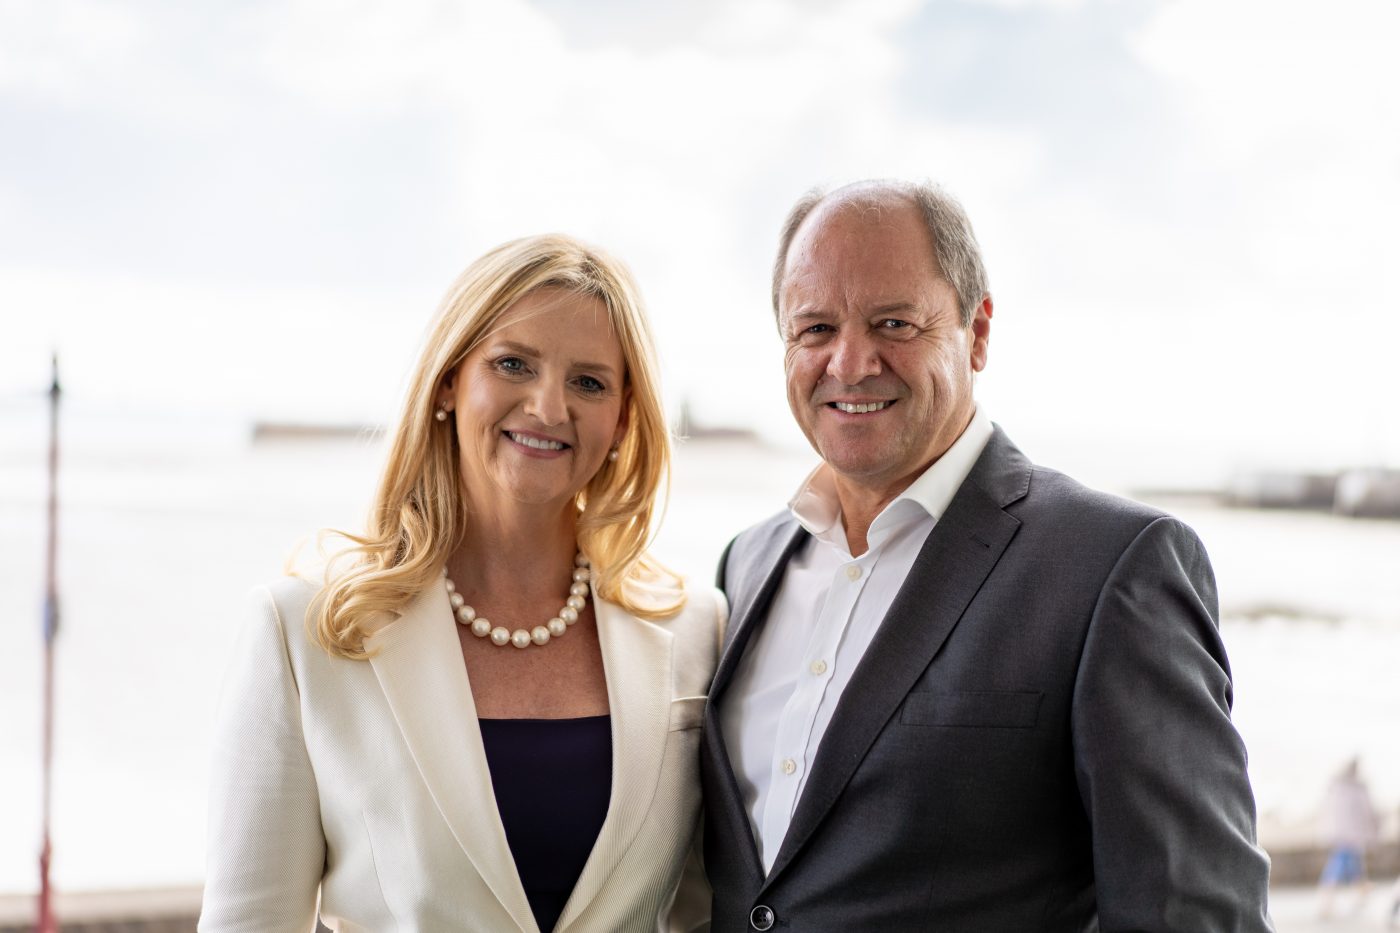 Christie’s International Real Estate Welcomes Gill and Steven Hunt to the Masters Circle, which recognizes the network’s top agents